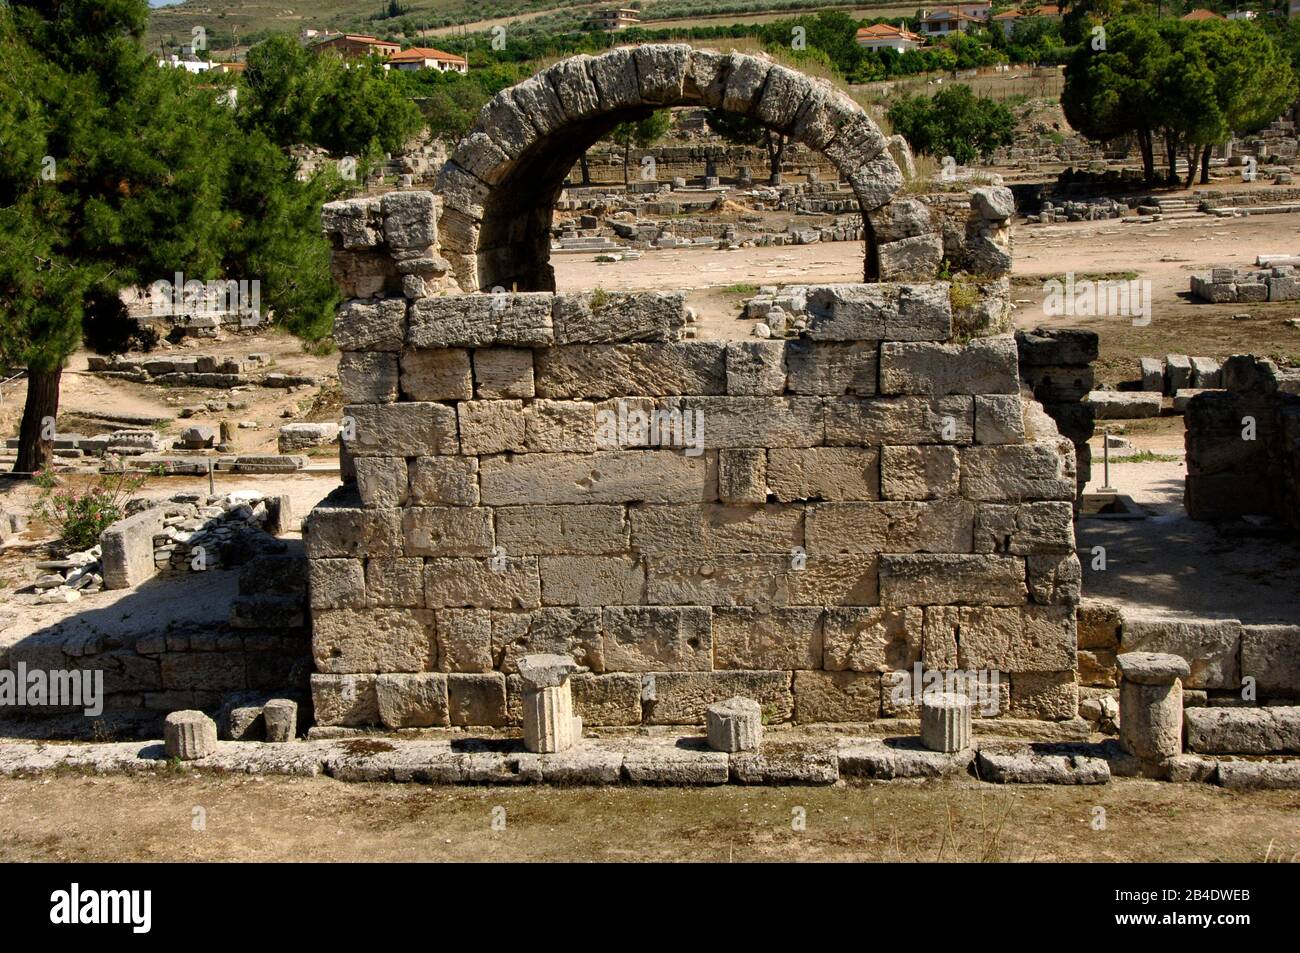 Greece. Peloponnese. Archaeological site of Corinth. Ruins of an arch of a shop in the Ancient Agora. Stock Photo